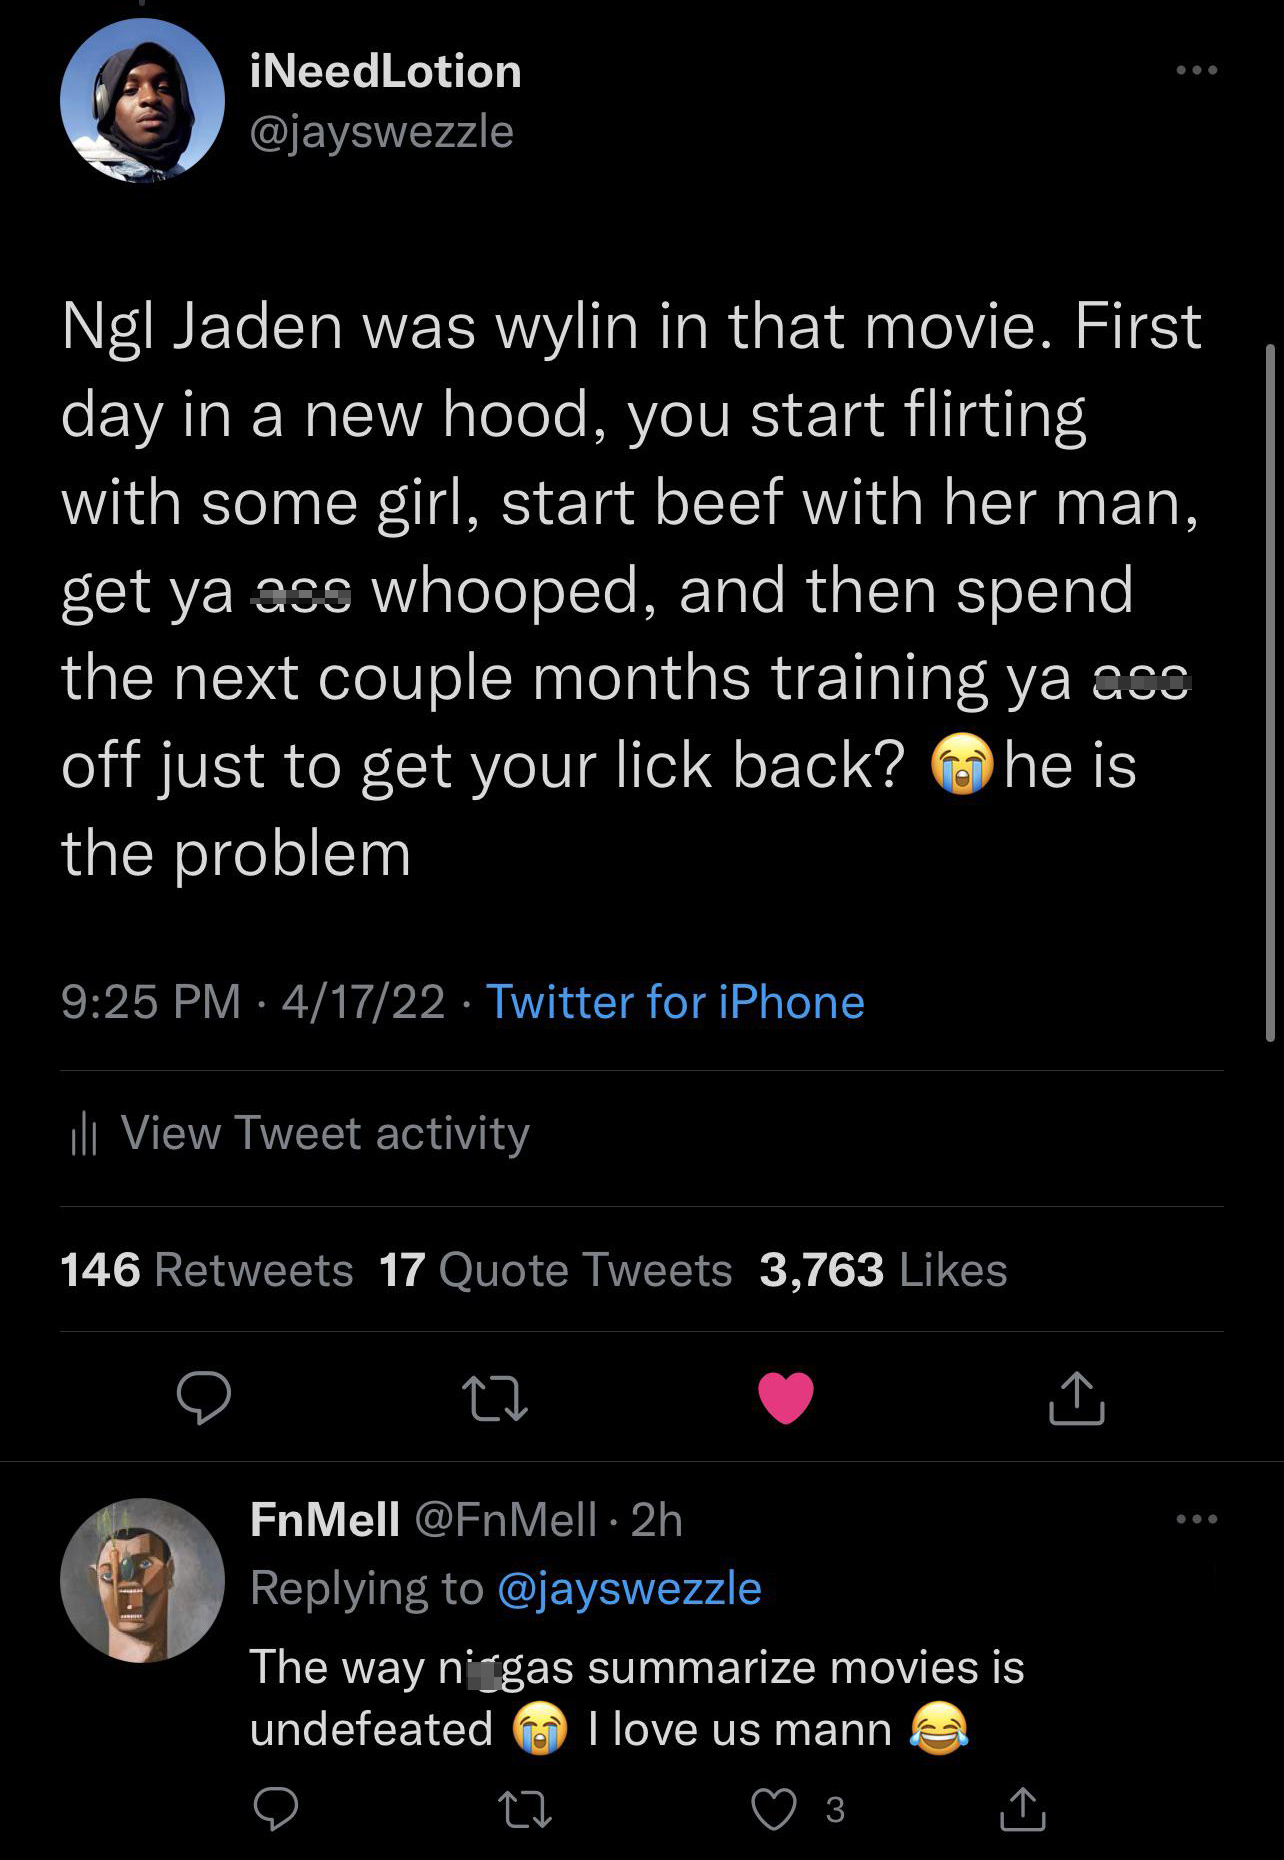 funny tweets - screenshot - iNeedLotion Ng| Jaden was wylin in that movie. First day in a new hood, you start flirting with some girl, start beef with her man, get ya ass whooped, and then spend the next couple months training ya ass off just to get your 